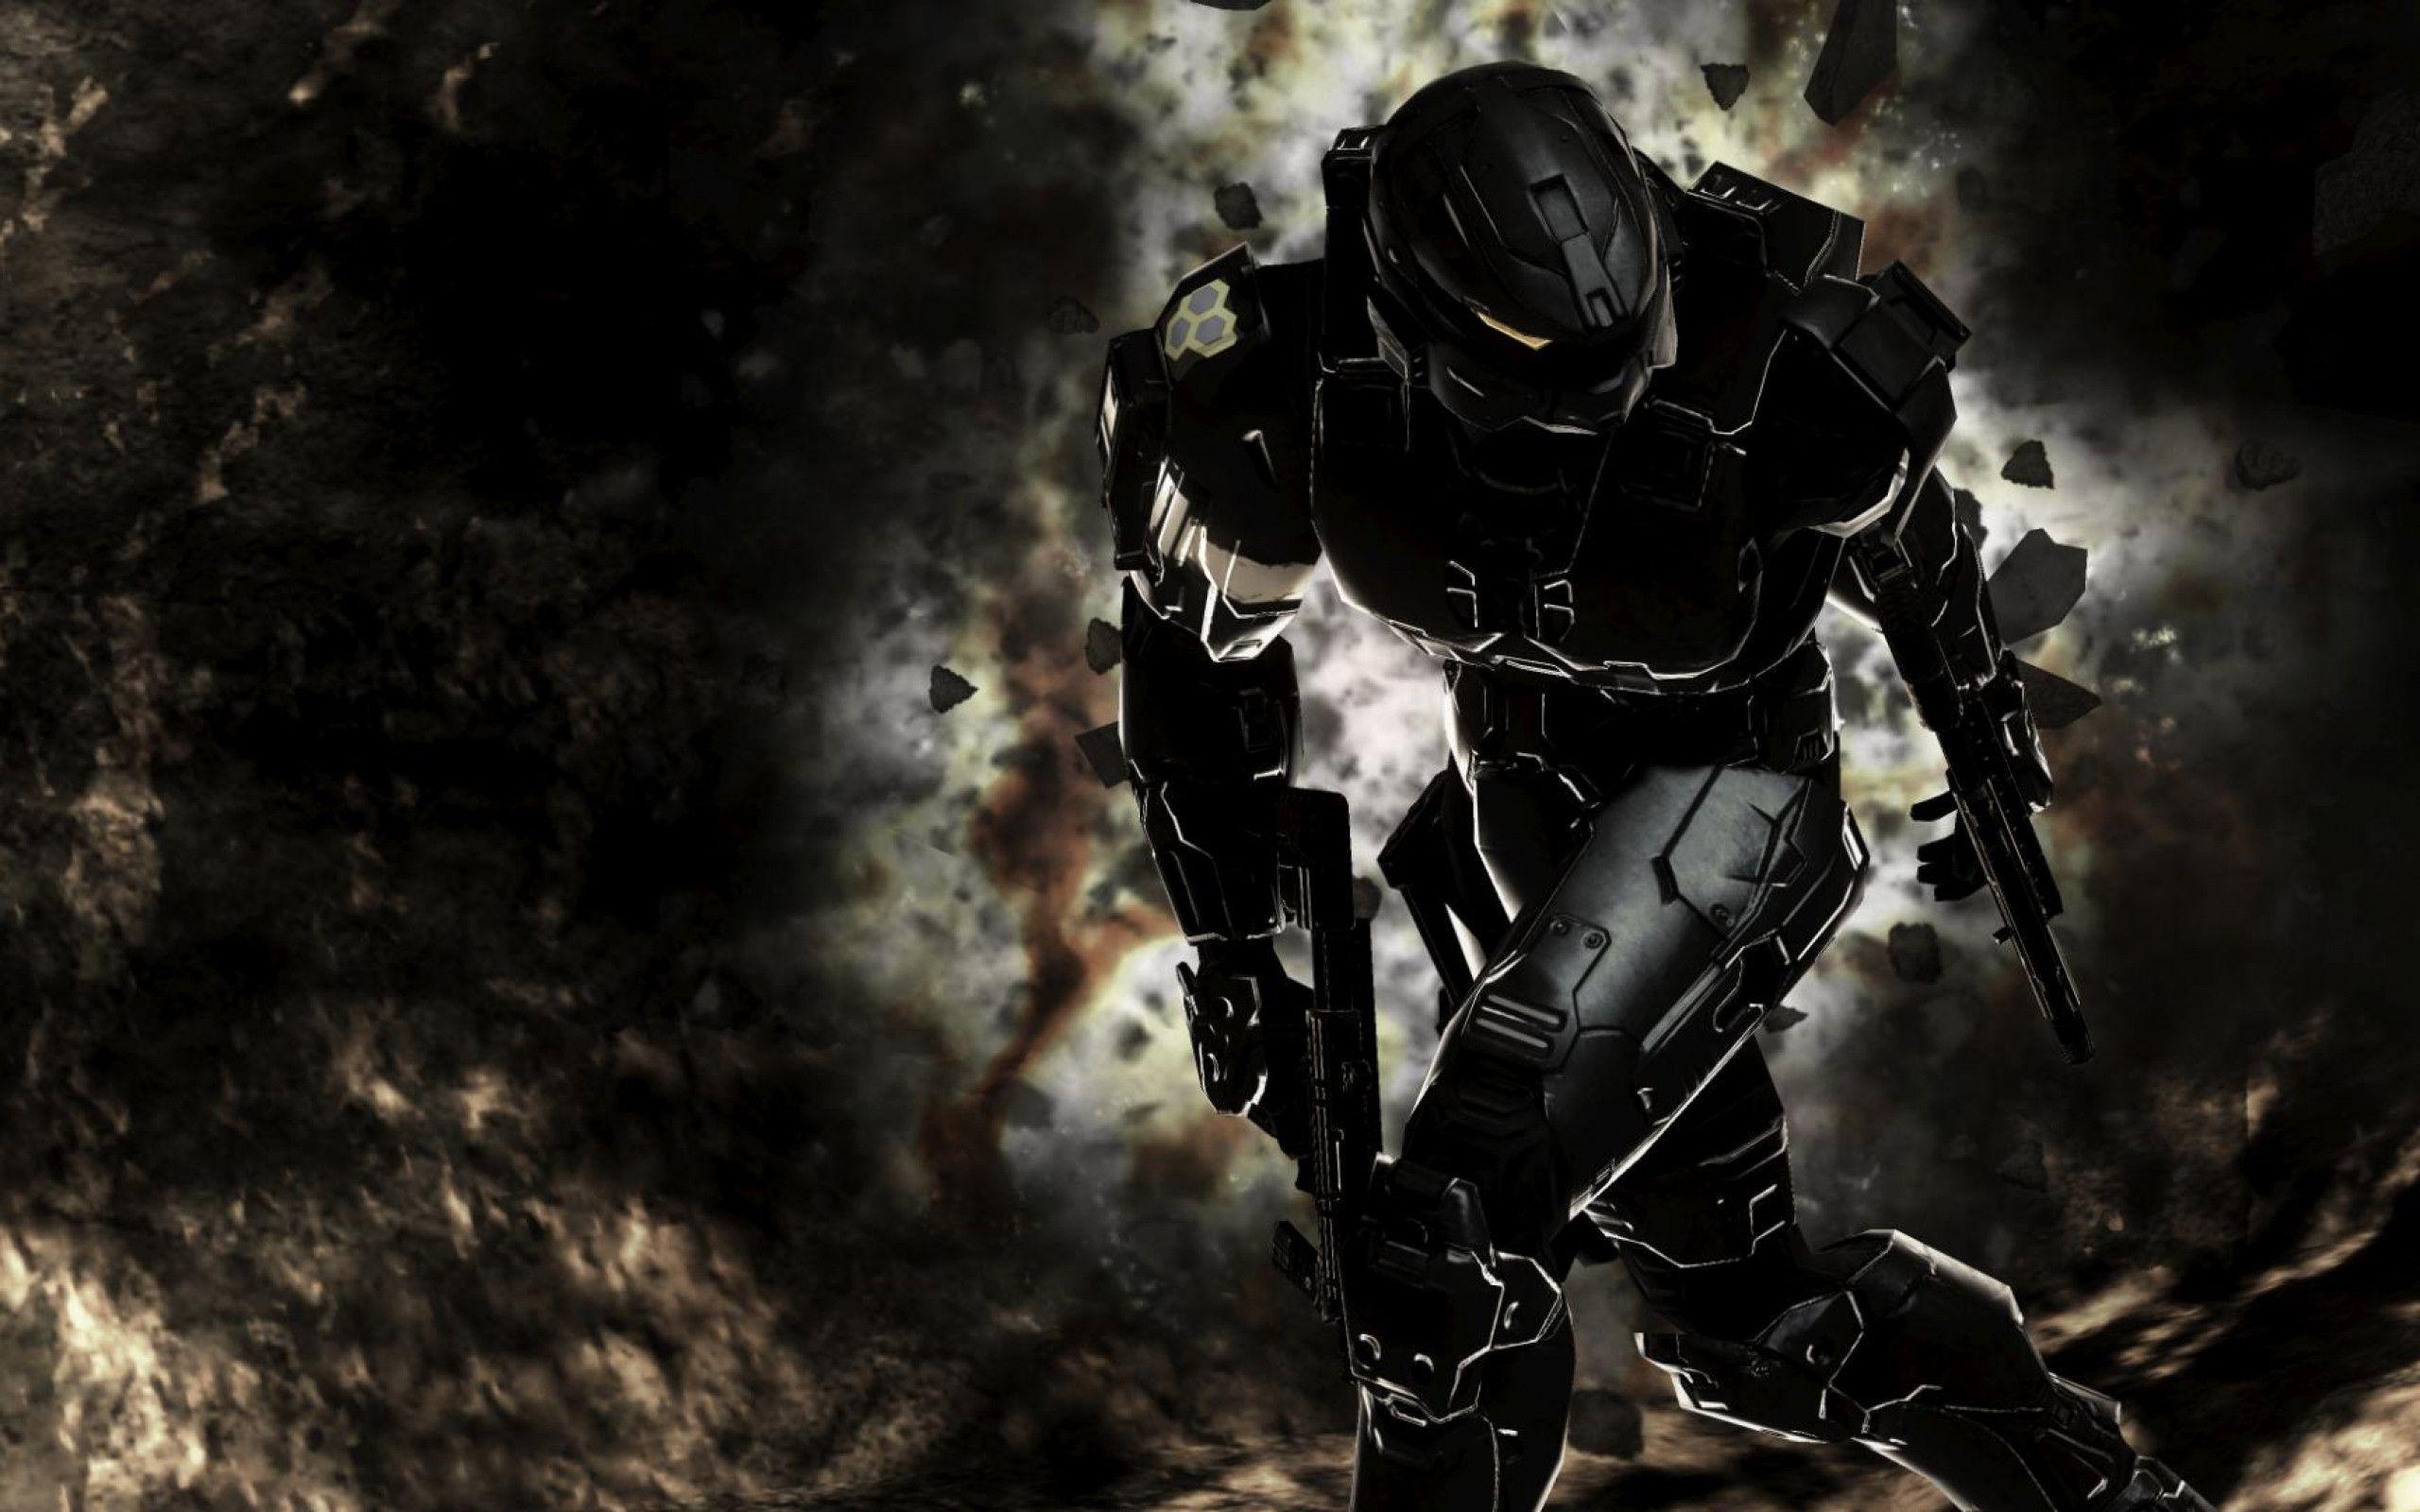 Halo 3 The Game Wallpaper Hd Widescreen Game Wallpaper HD Free